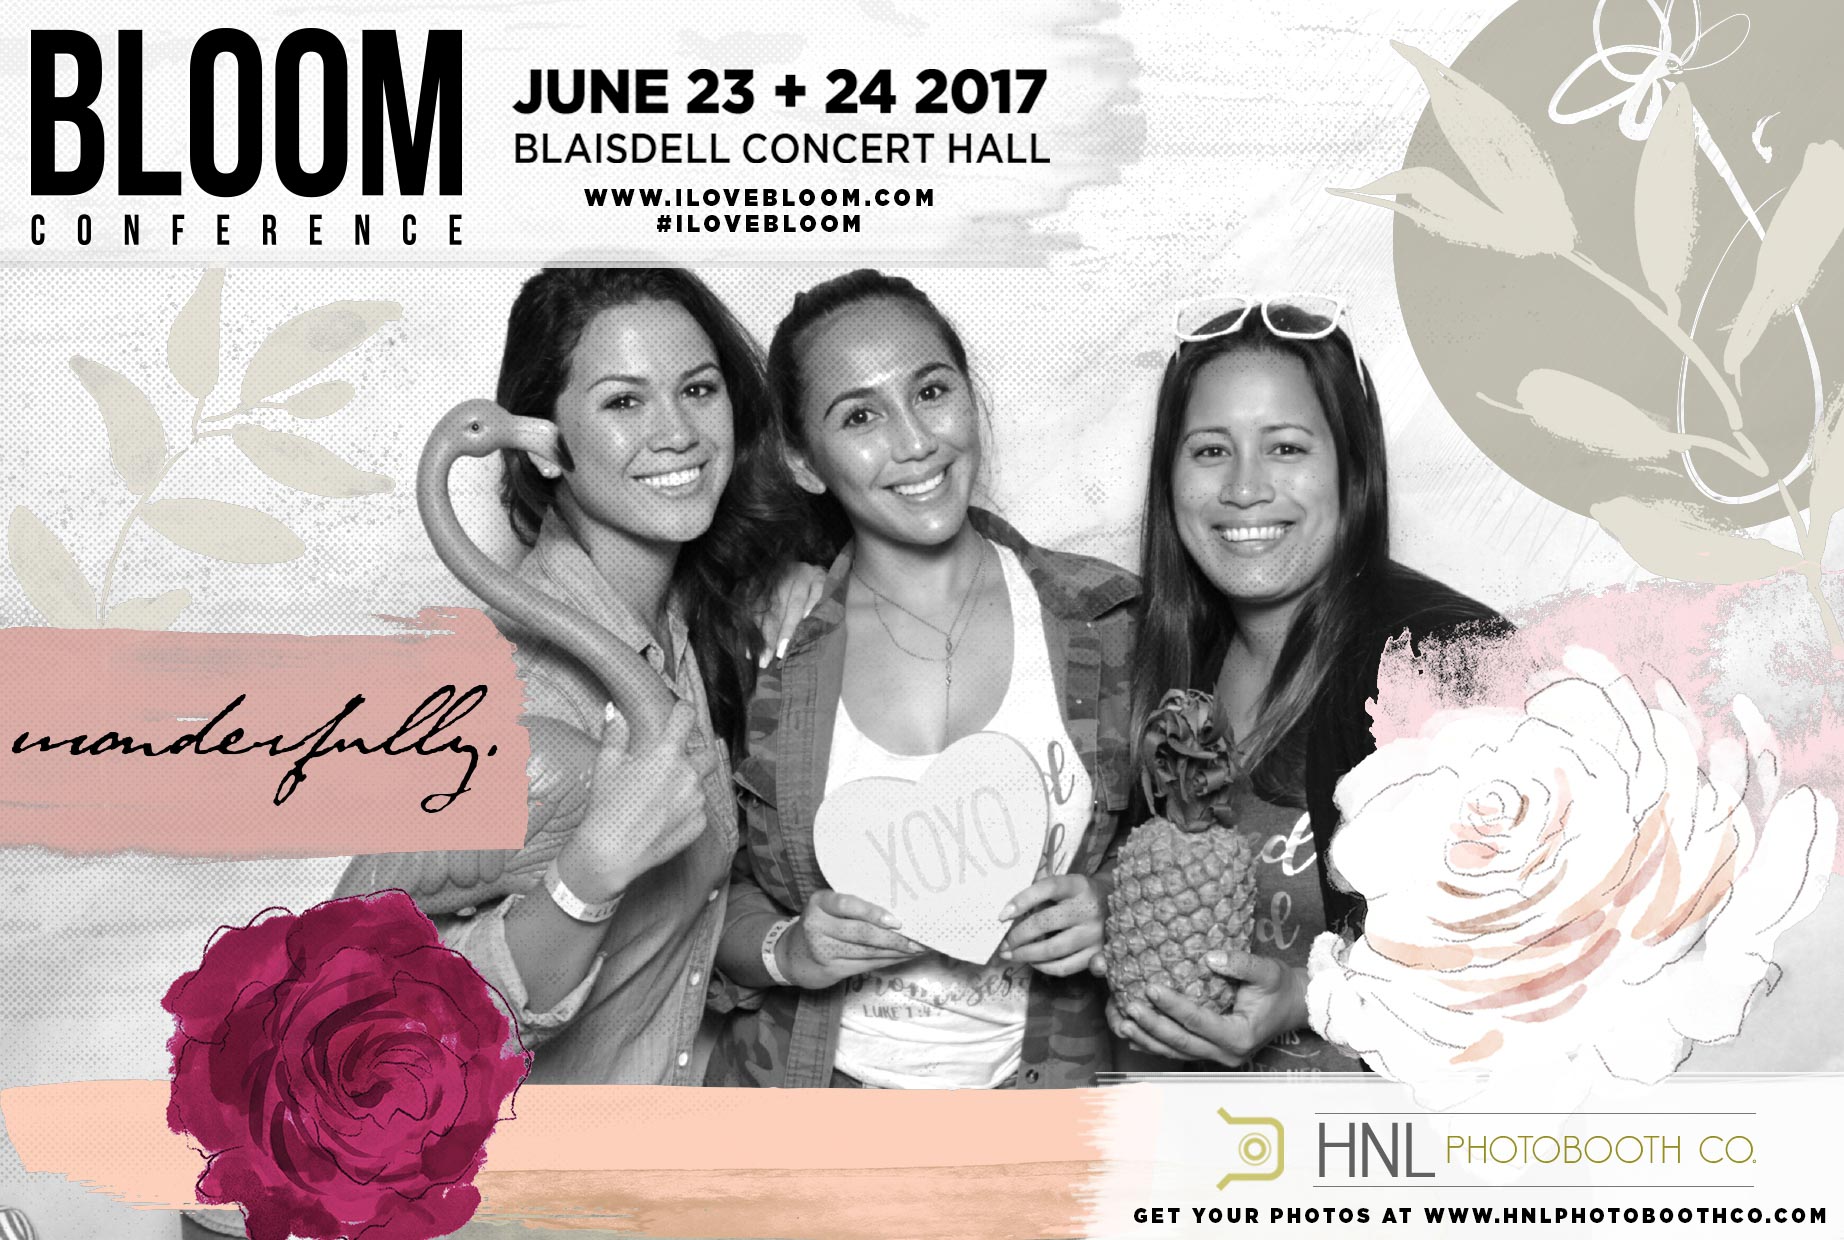 Bloom Conference Blaisdell Concert Hall Oahu Hawaii Photo Booth NEW-63.jpg